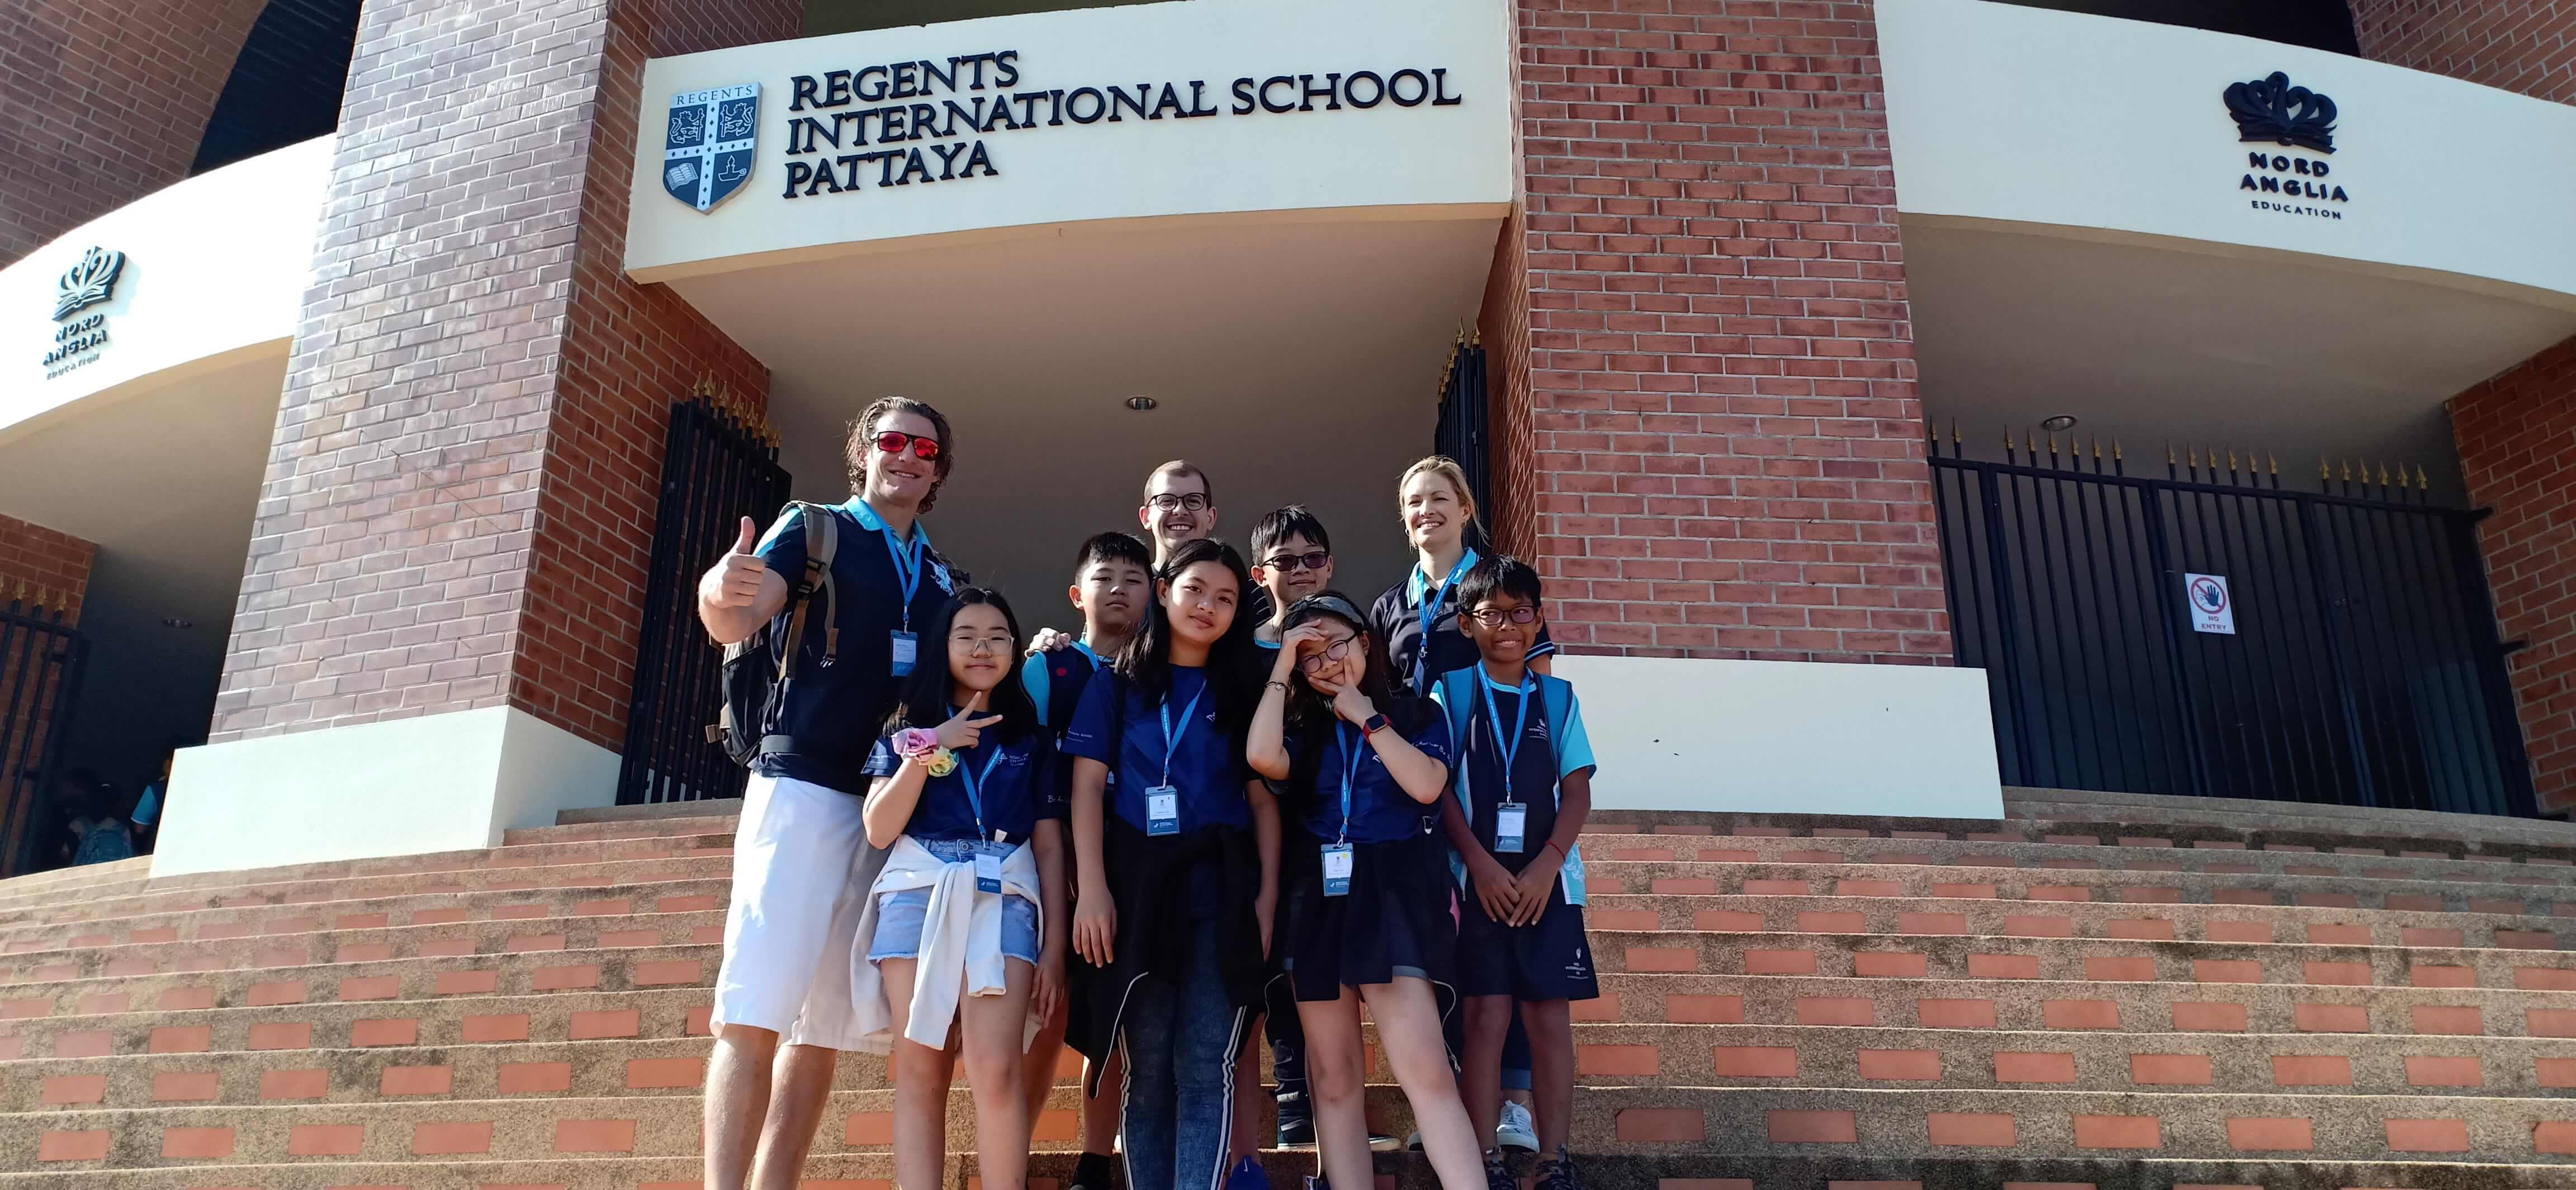 NAE STEAM Festival provides Northbridge students with an opportunity to showcase their skills - nae-steam-festival-provides-northbridge-students-with-an-opportunity-to-showcase-their-skills